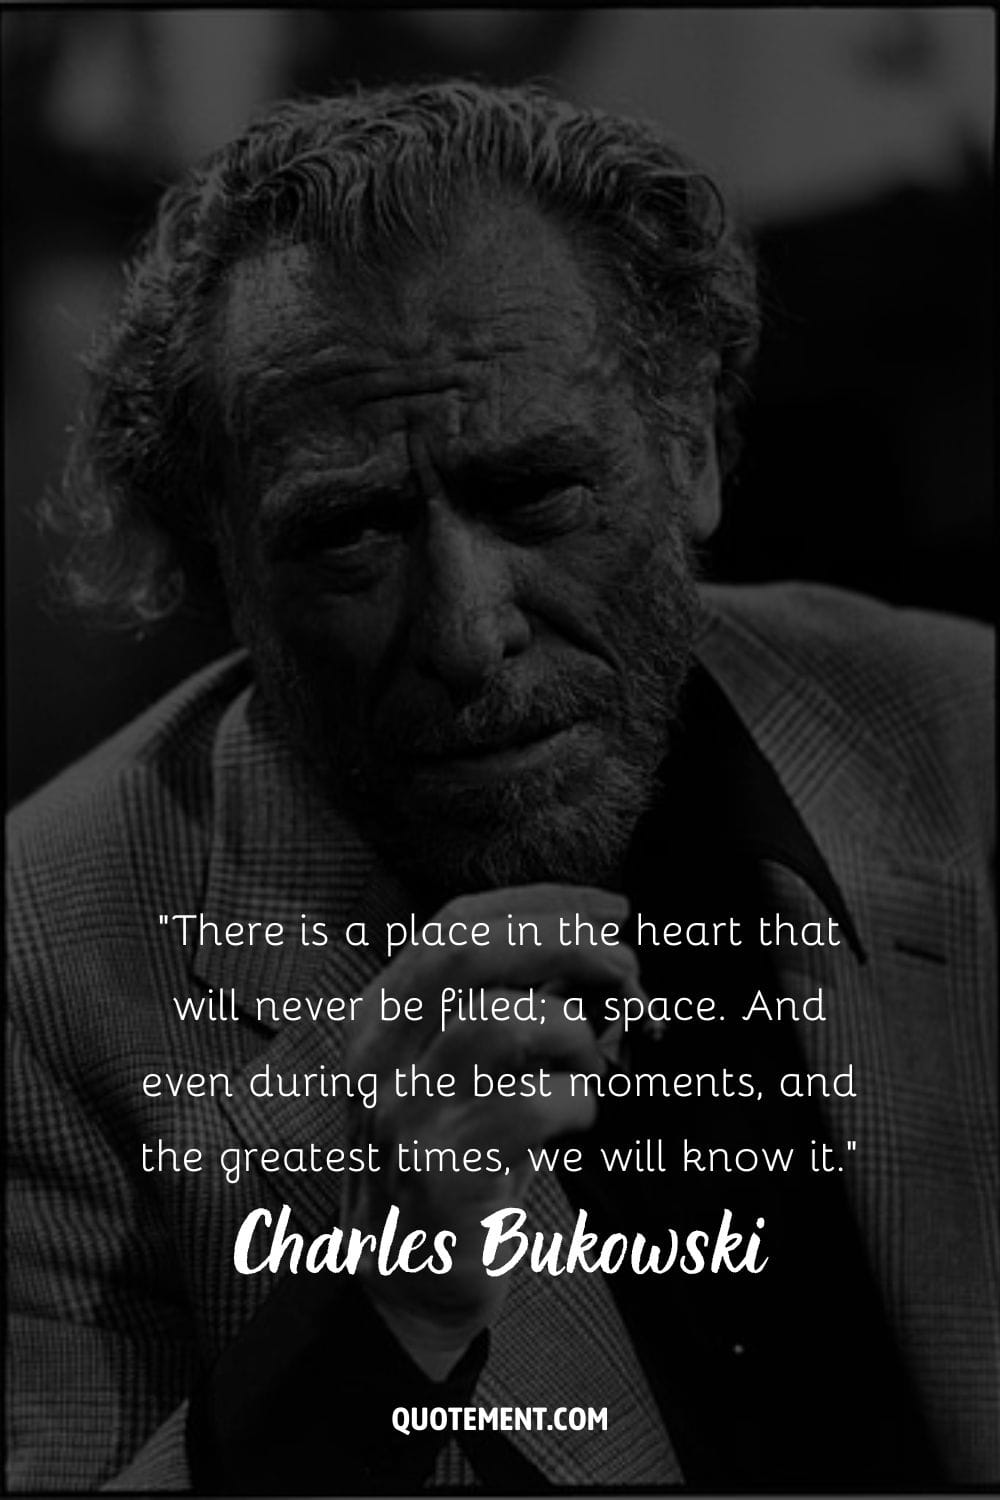 Charles Bukowski in a sharp suit, cigarette at the ready